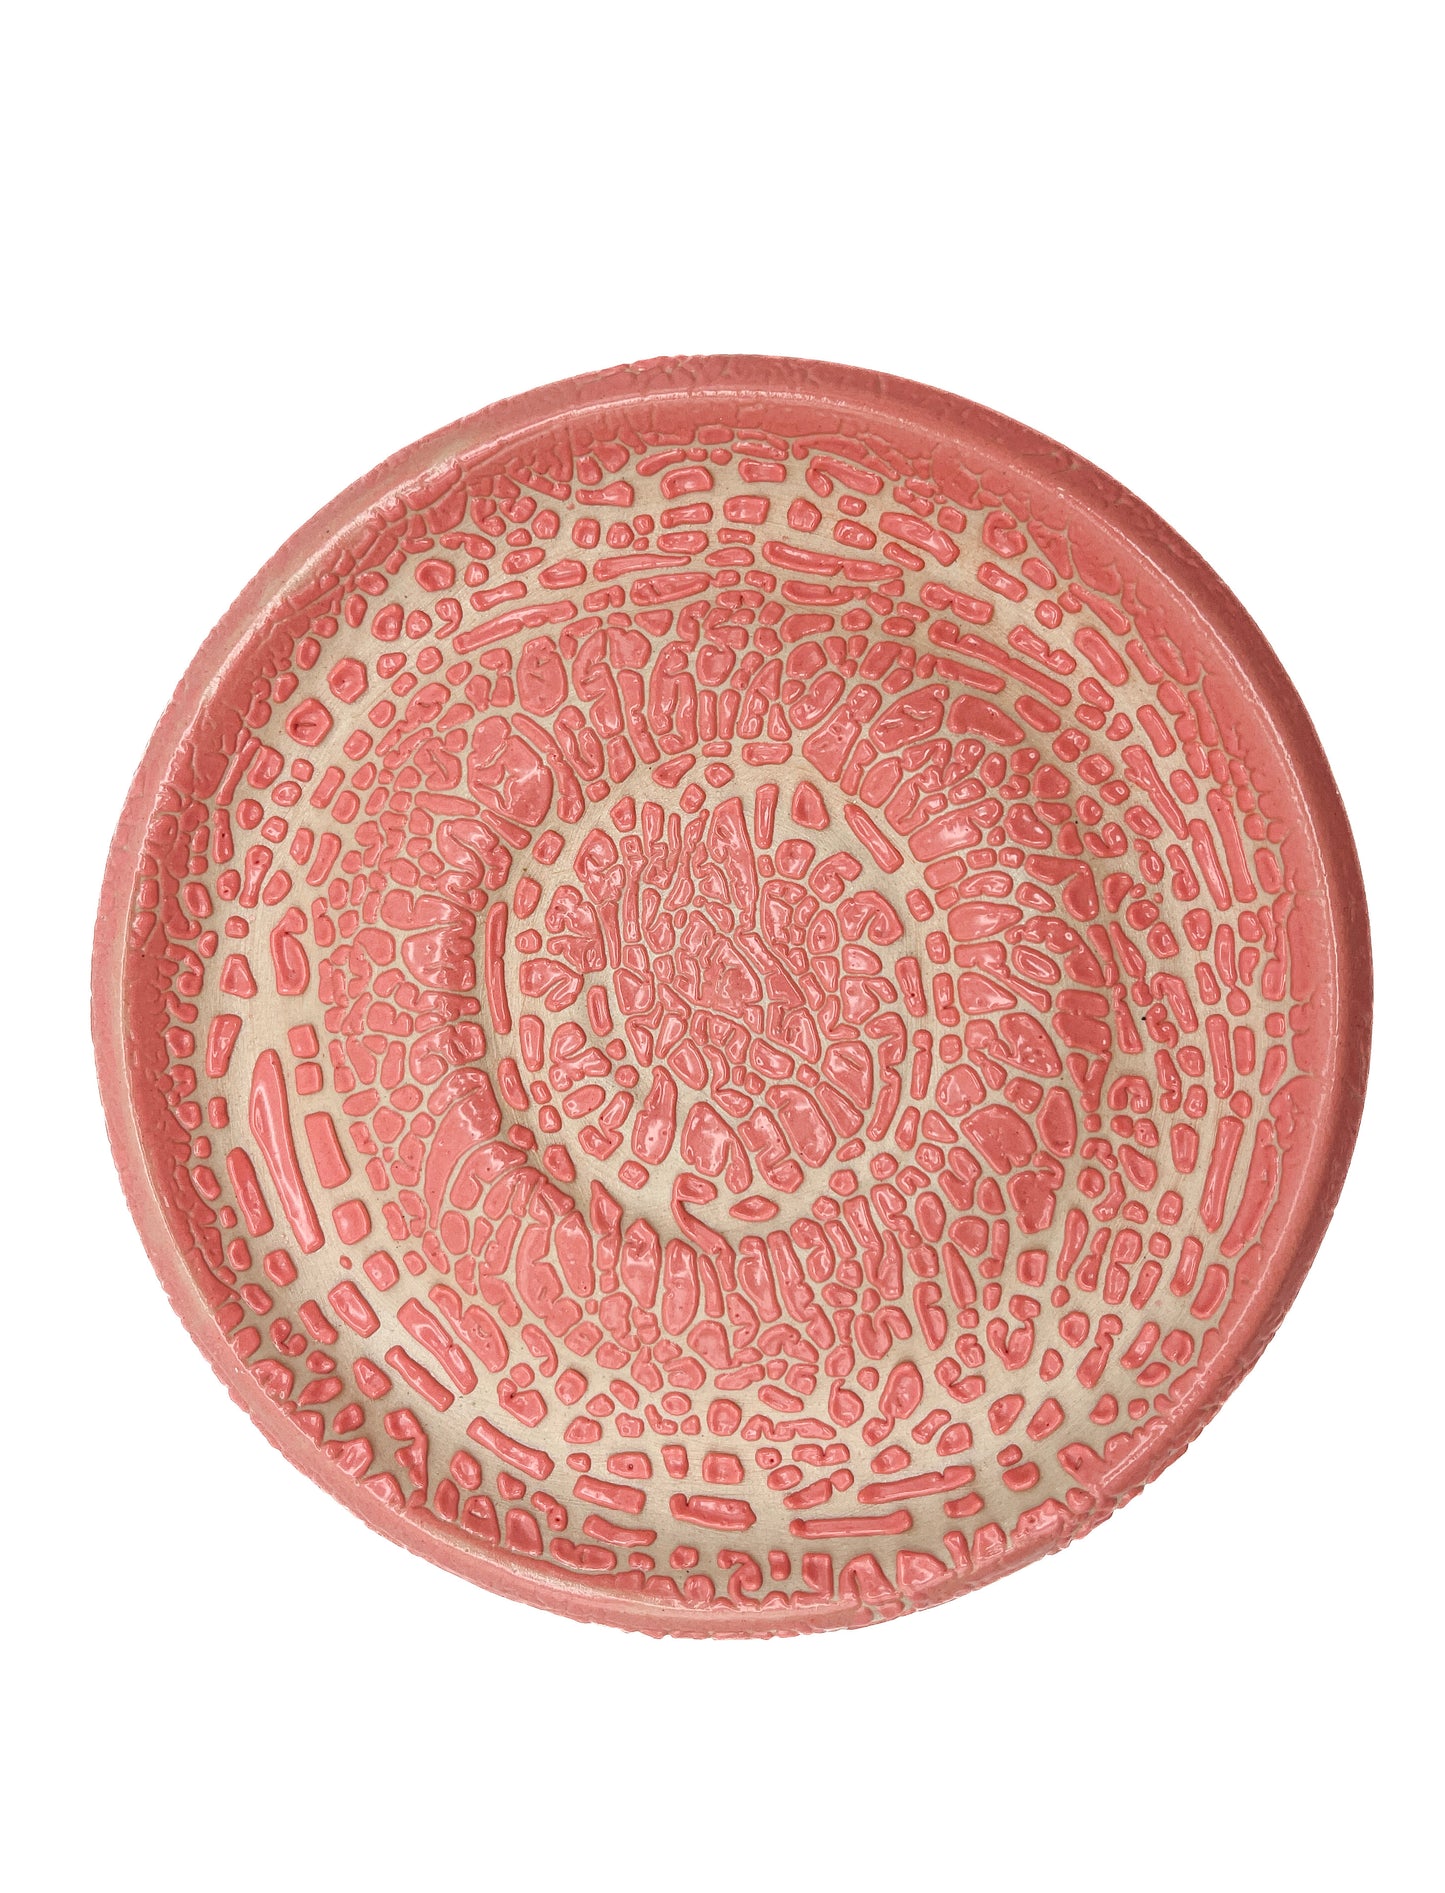 Fired plate with pink crawl glaze on dark clay. Crawling texture when fired to cone 5 or 6.